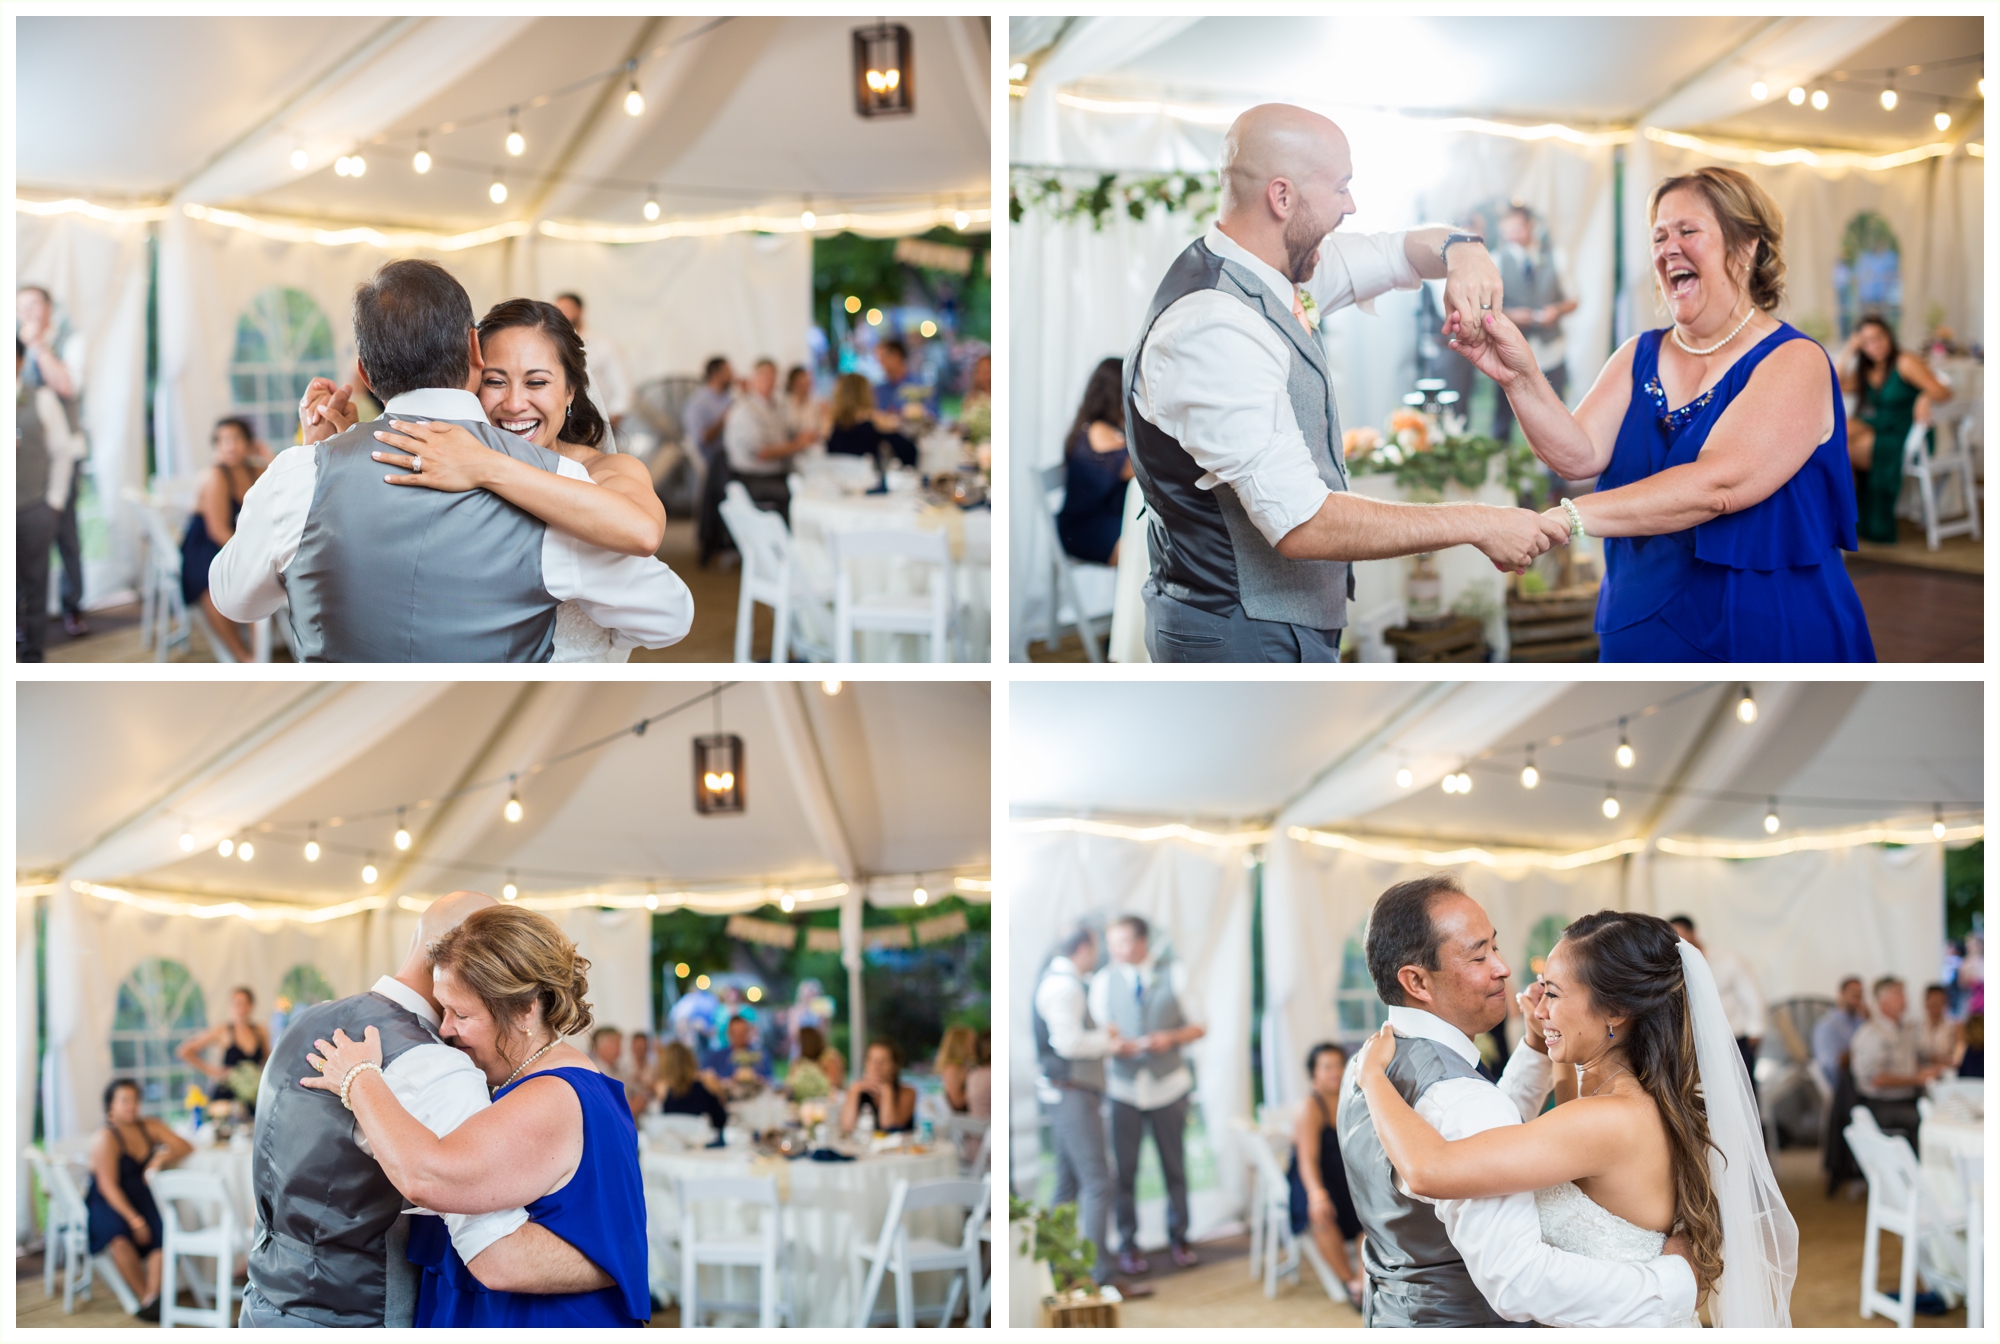 bride and groom share first dance with parents at wedding reception